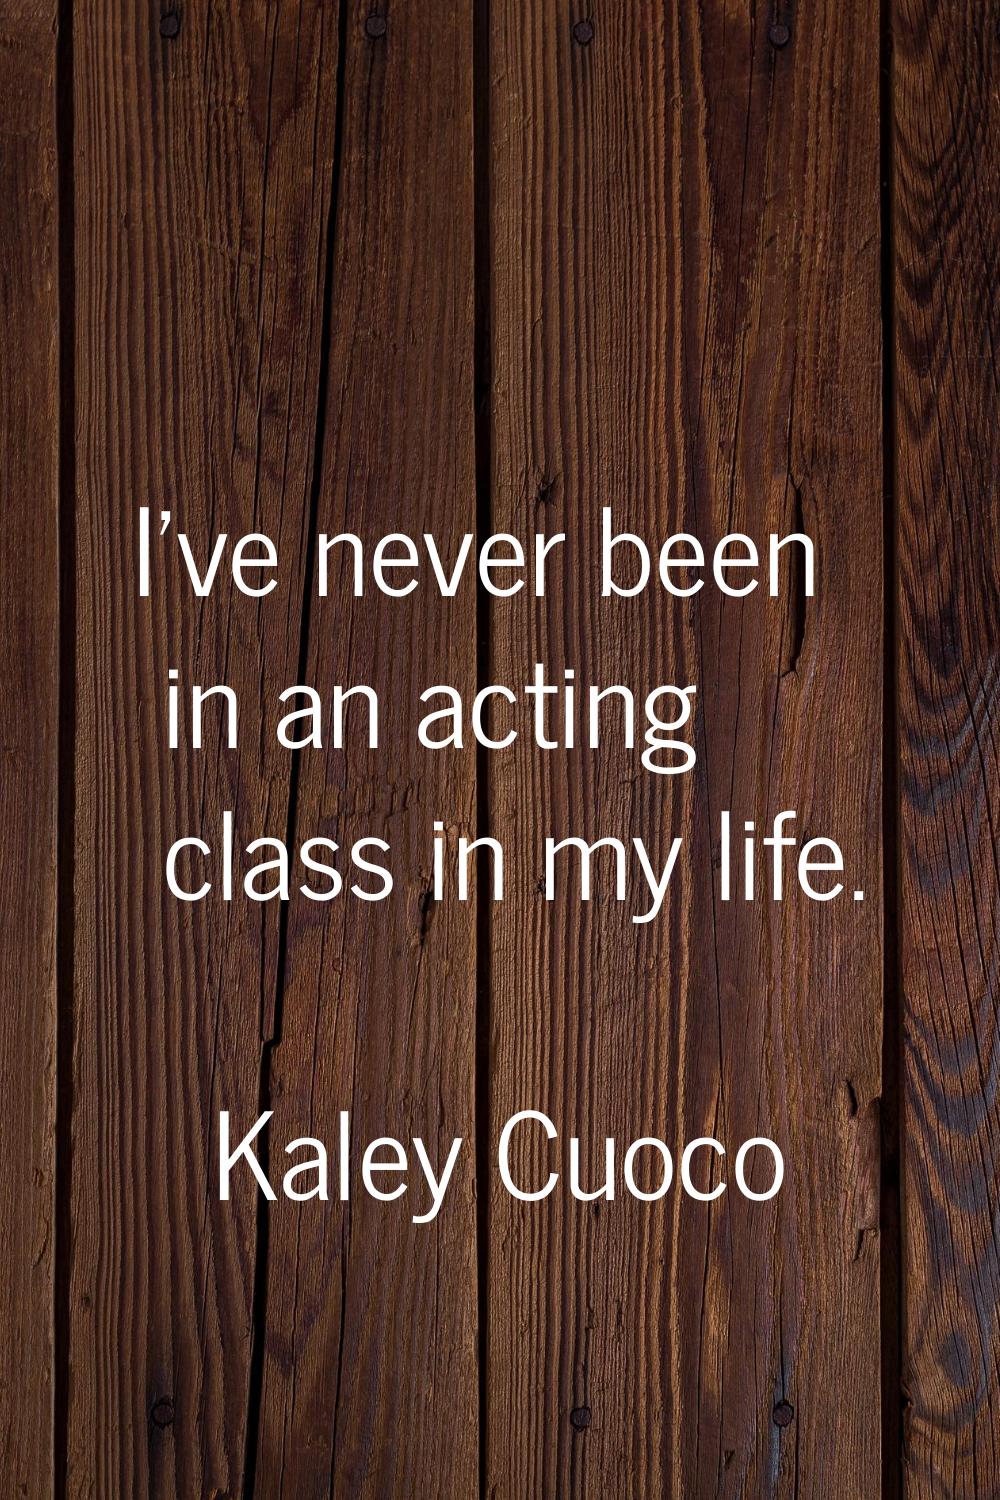 I've never been in an acting class in my life.